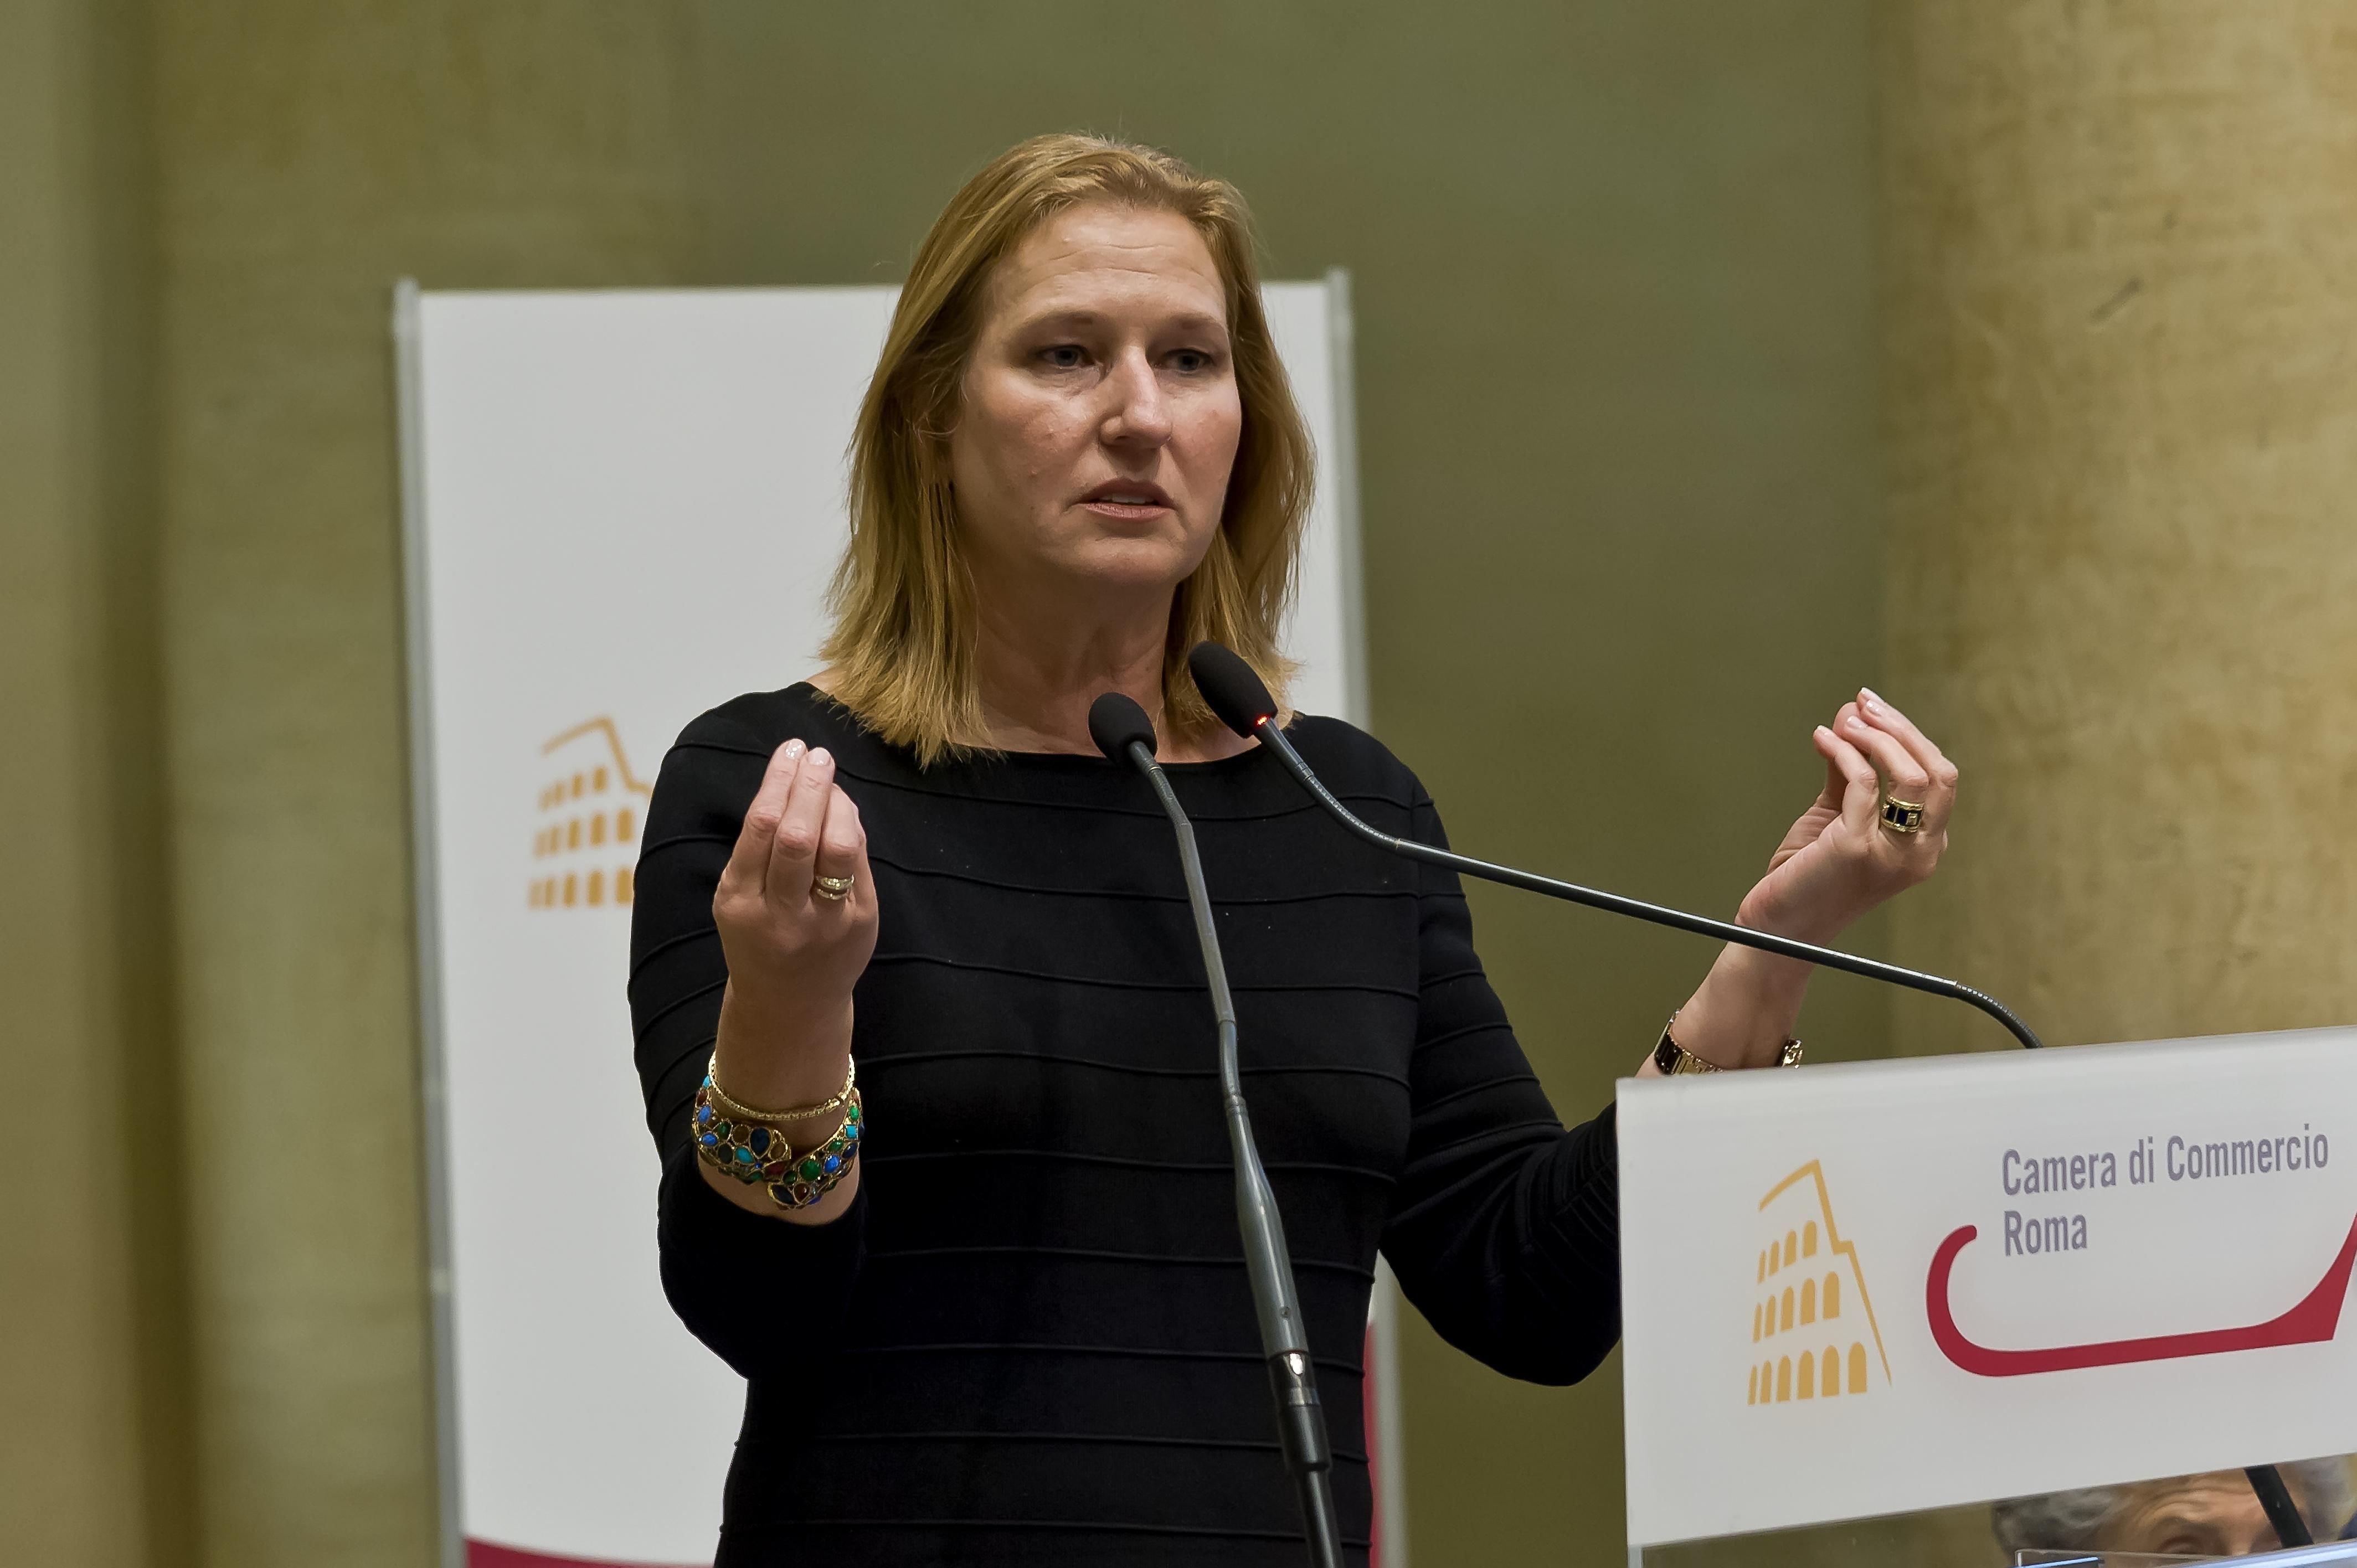 Tzipi Livni (pictured) is the former Israeli foreign minister who has been the subject of arrest warrants and a lawsuit in three countries for her alleged role in war crimes committed during the 2008-09 Cast Lead invasion of Gaza. (Photo: Stefano Montesi/Corbis via Getty Images)